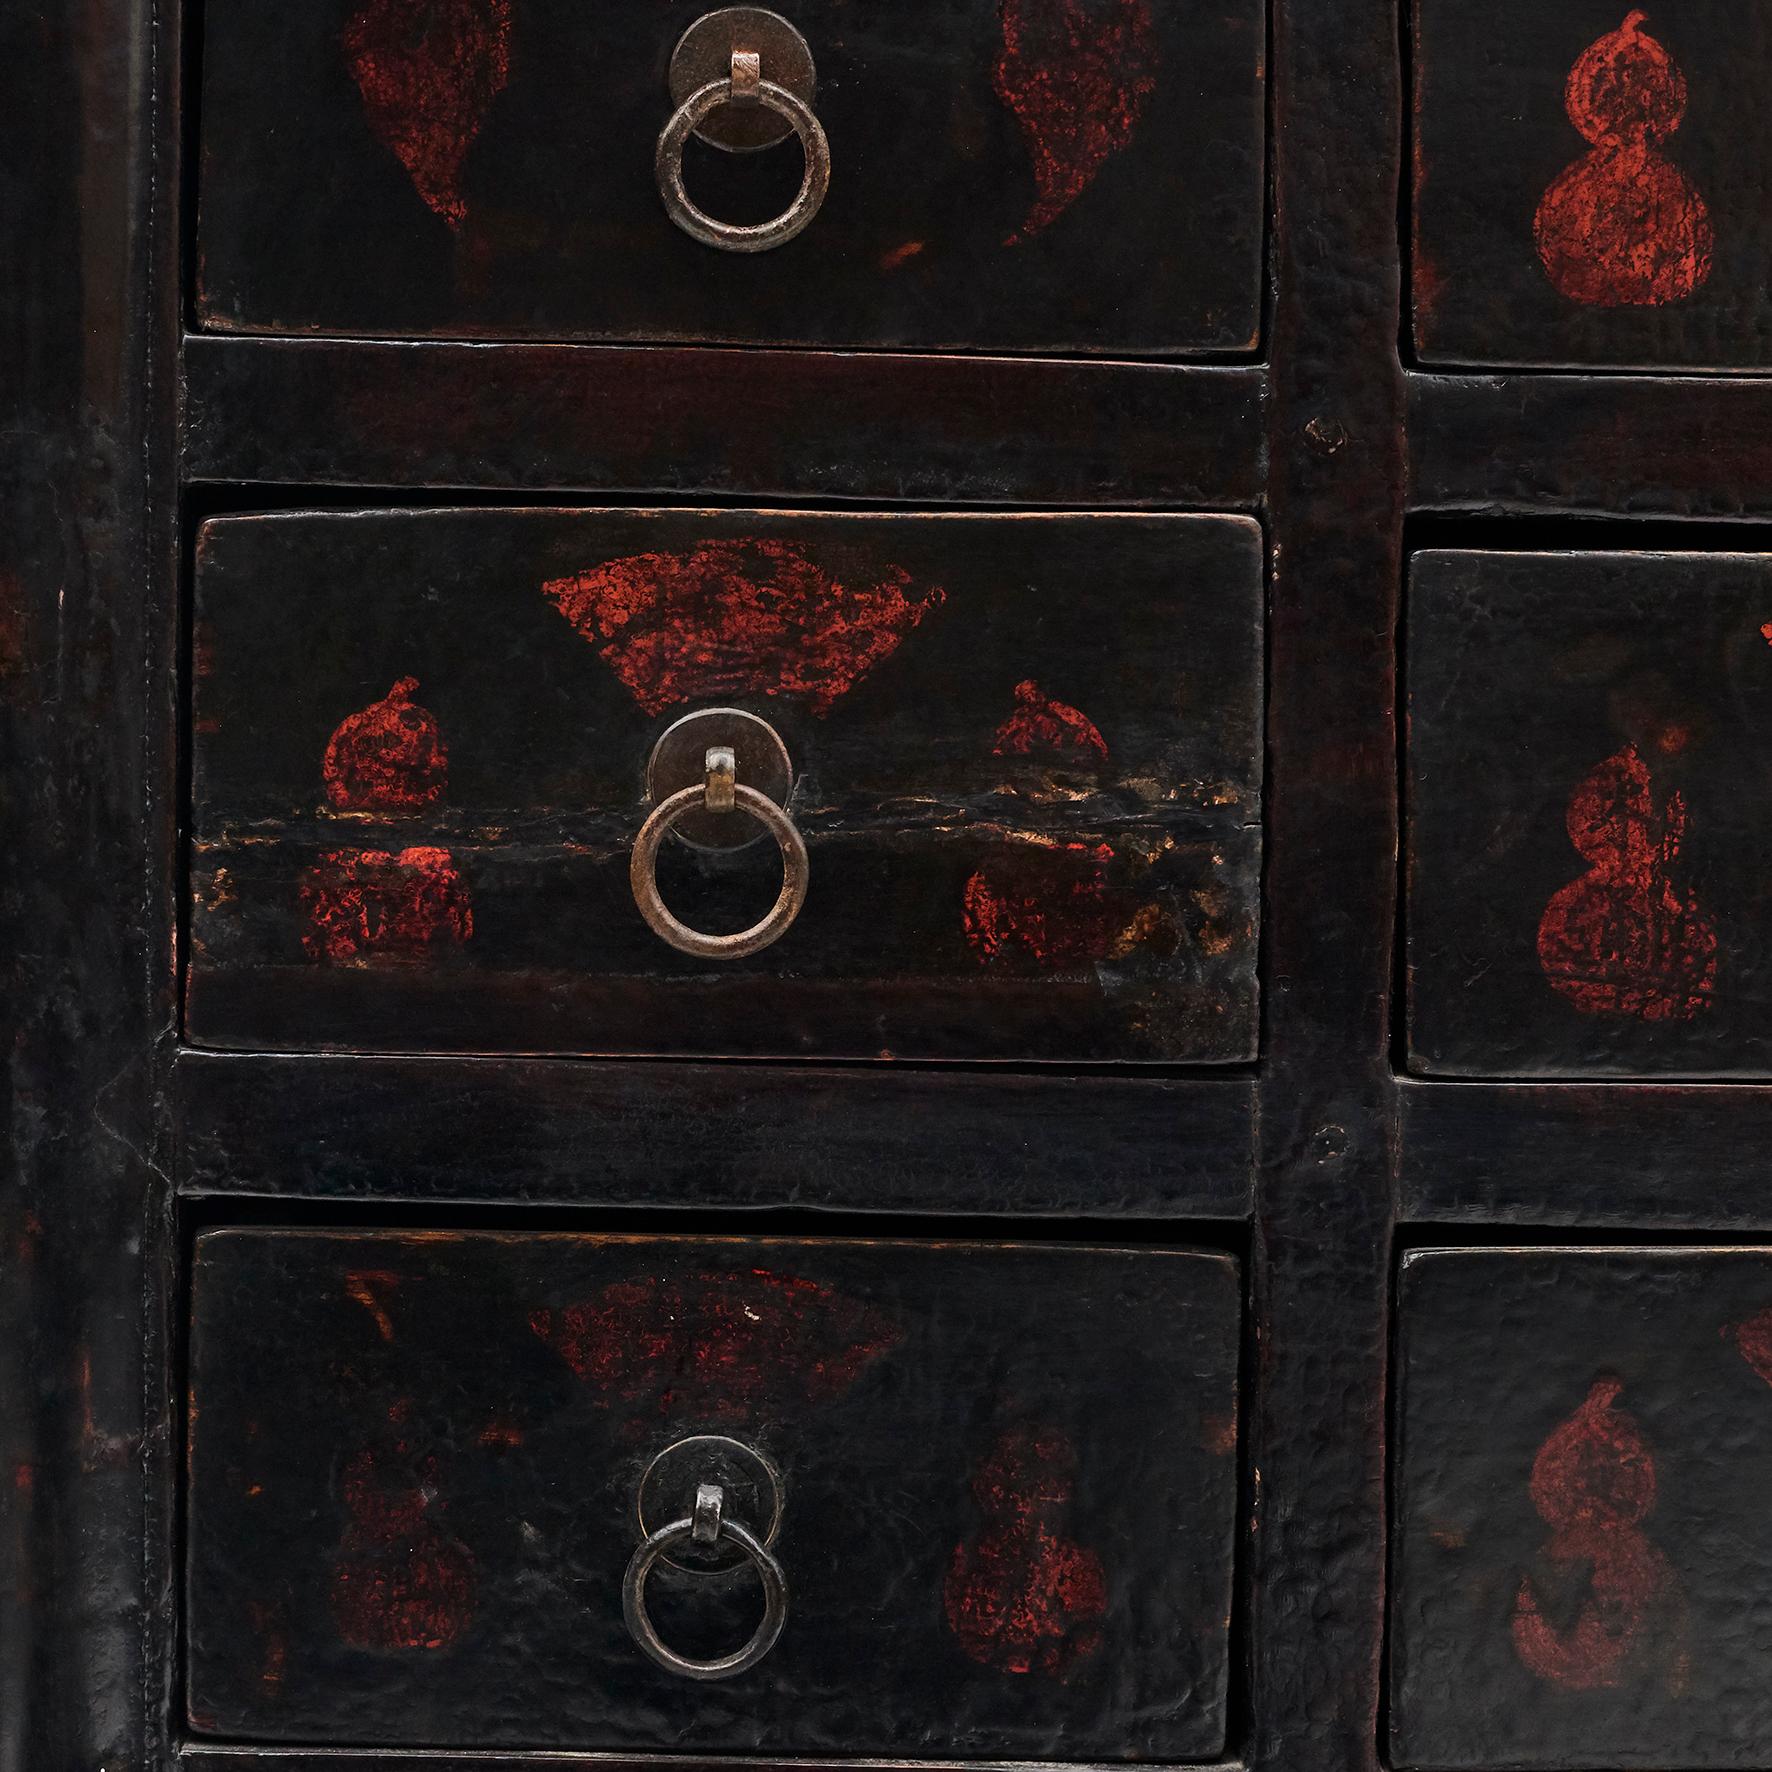 Lacquered Mid-19th Century Chinese Apothecary Medicine Cabinet with 28 Drawers